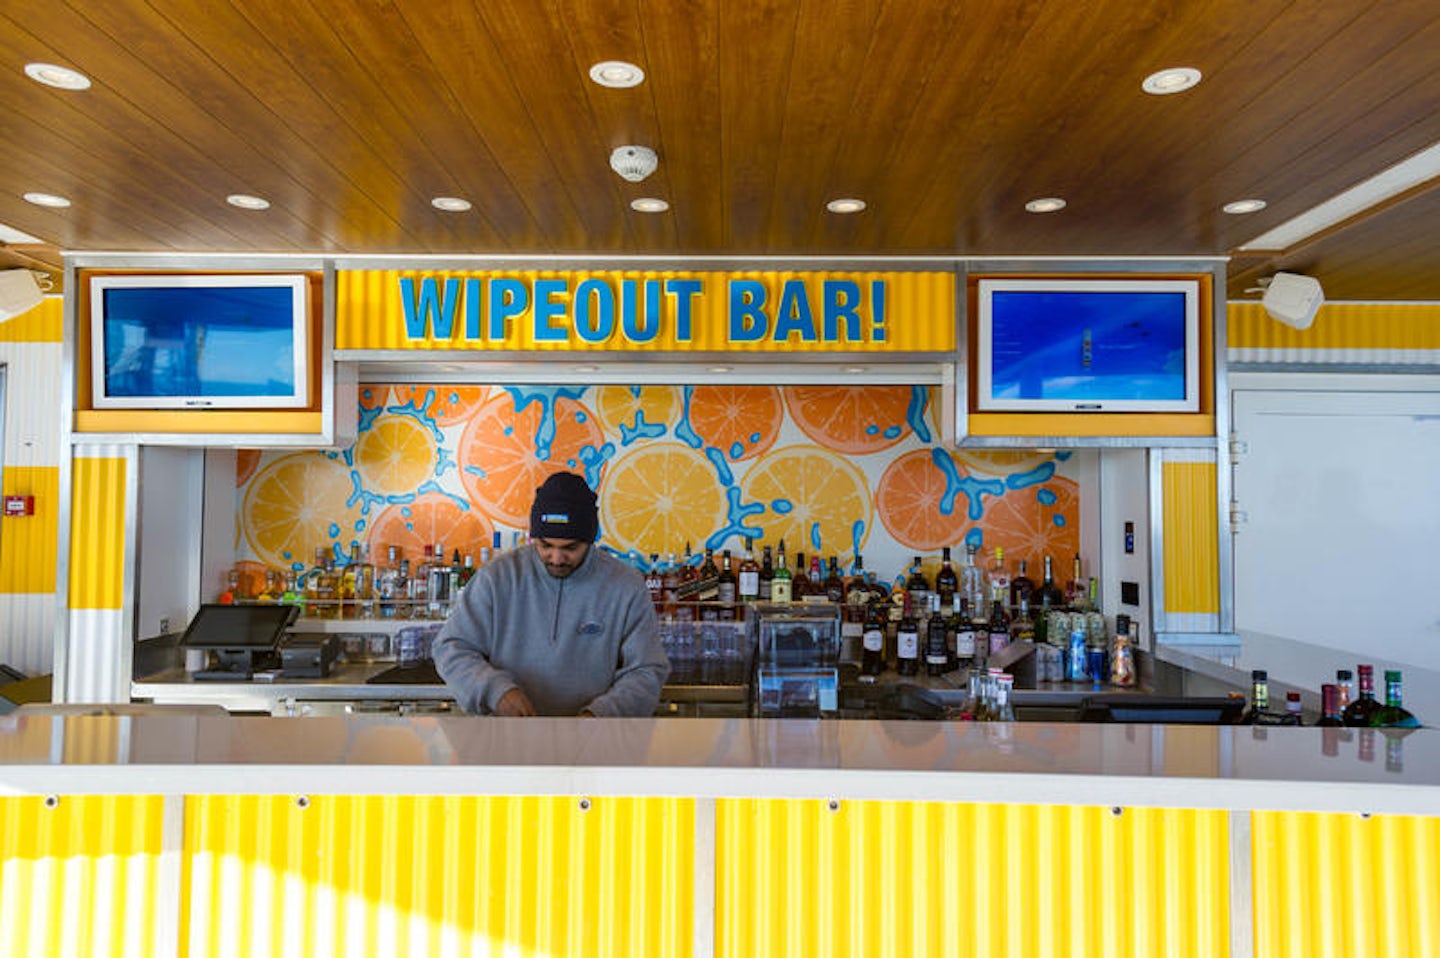 Wipeout Bar on Symphony of the Seas